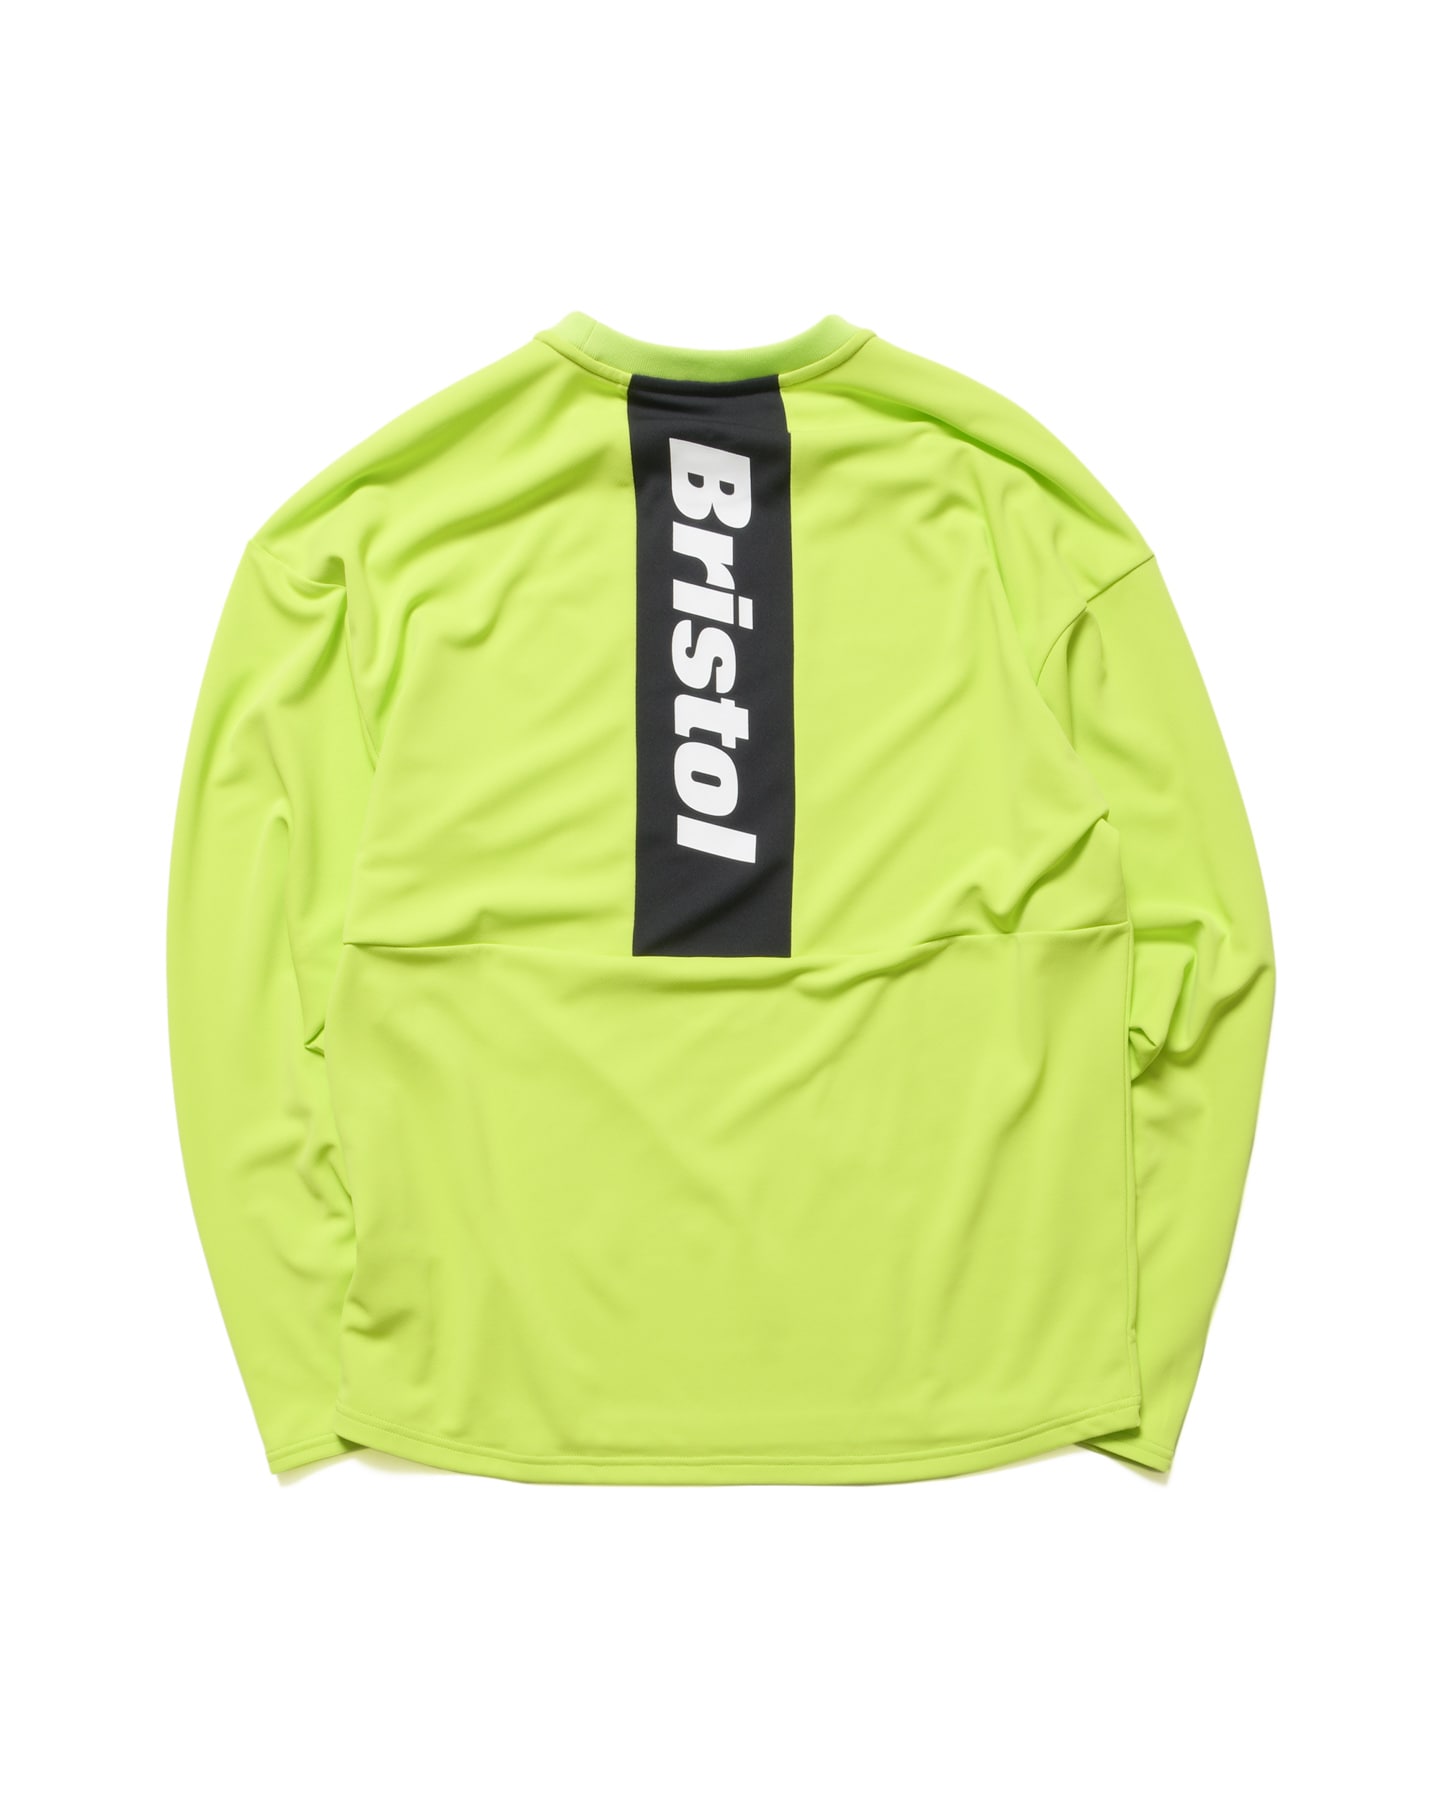 AW23 FCRB L/S TEAM PRACTICE TOP-